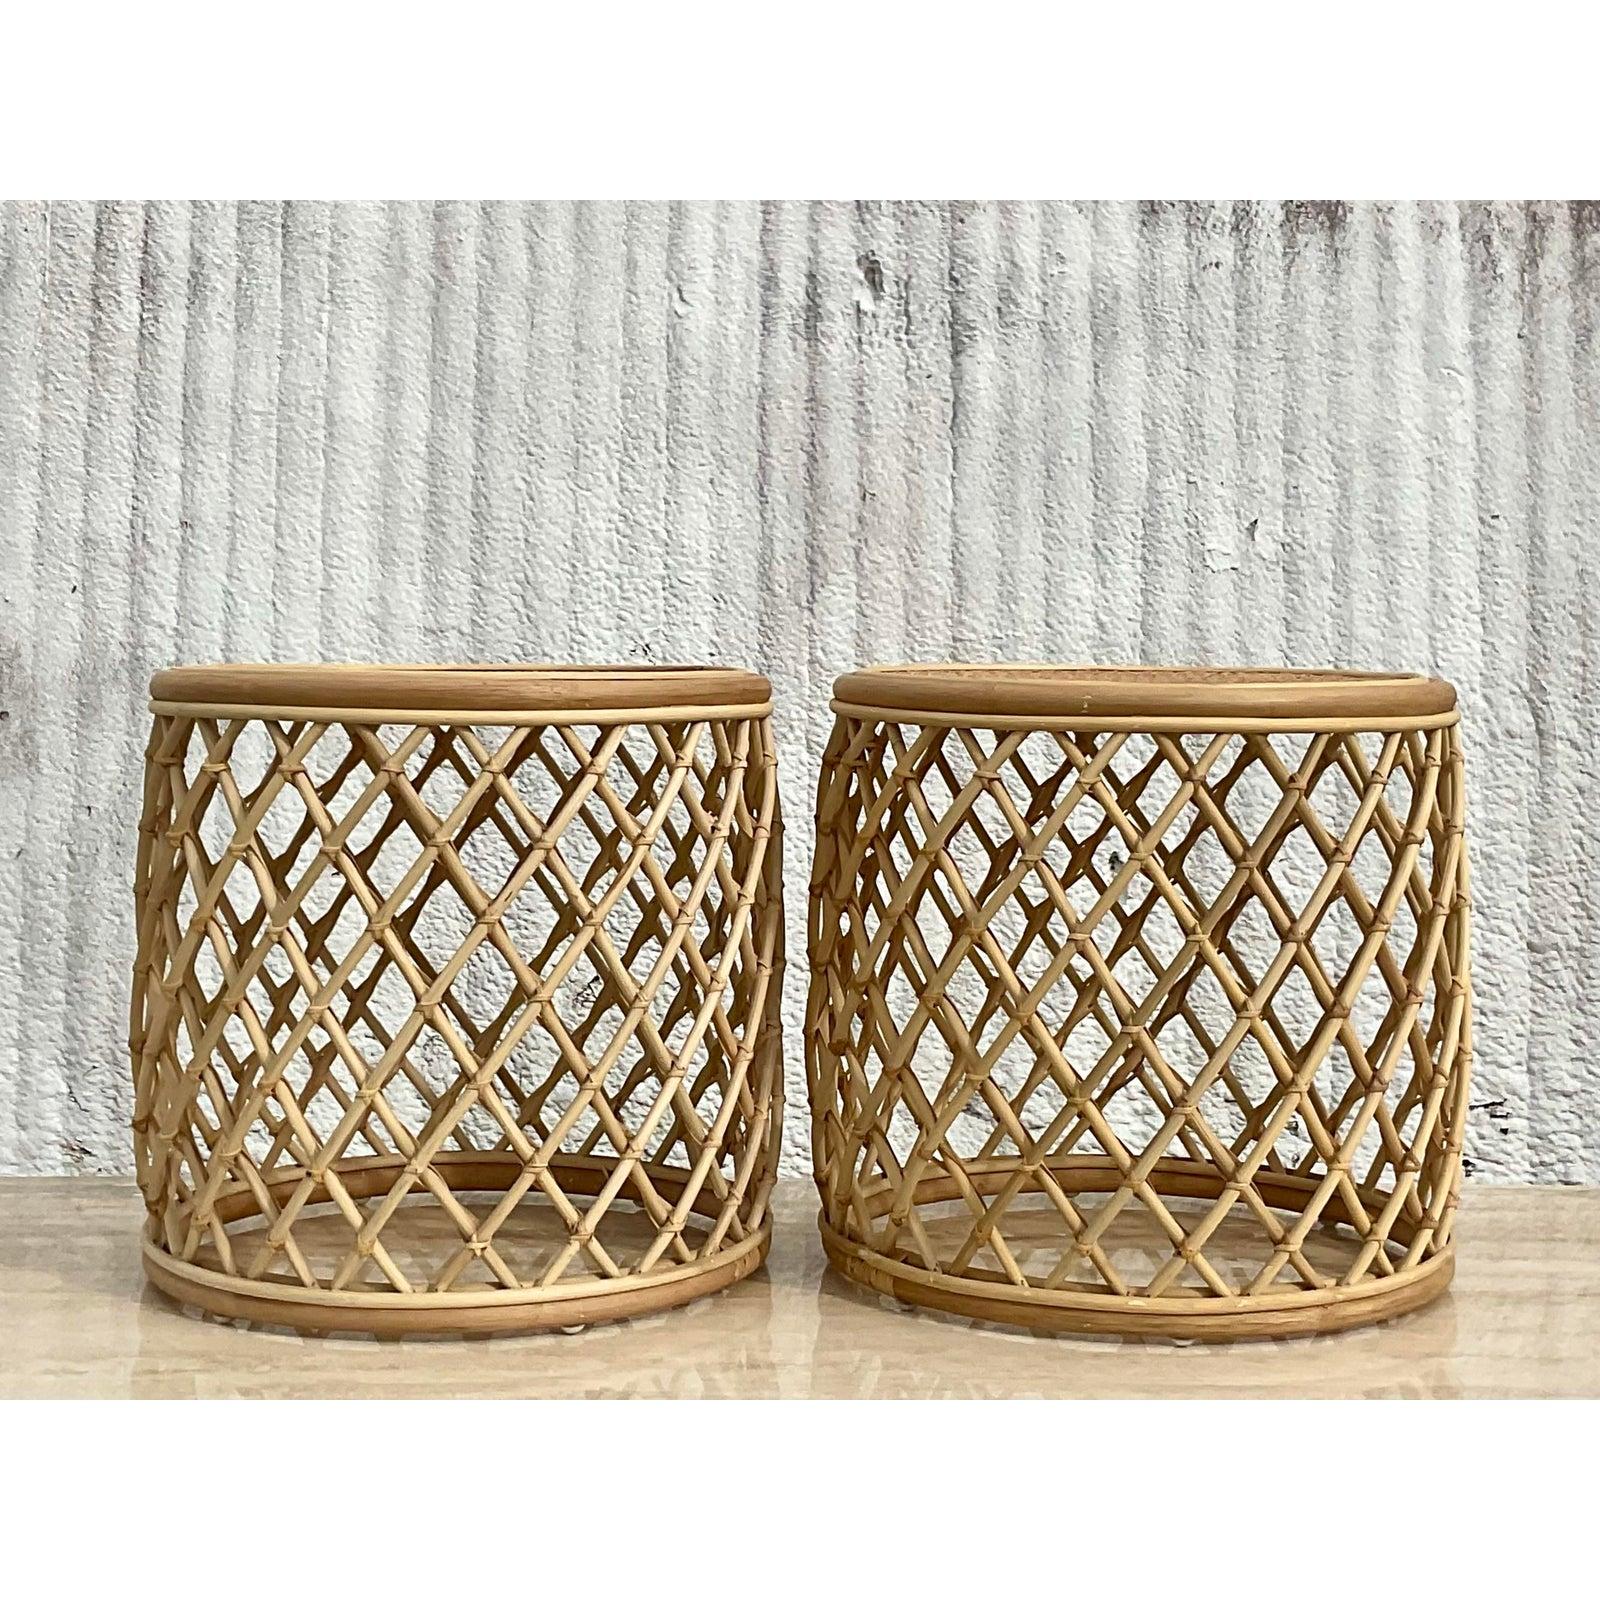 Coastal woven rattan side tables. A fab pair of cross hatched drum shape tables perfect for side tables or little drinks tables. Super versatile. Perfect for indoors or outdoors in a covered area. Acquired from a Palm Beach estate.